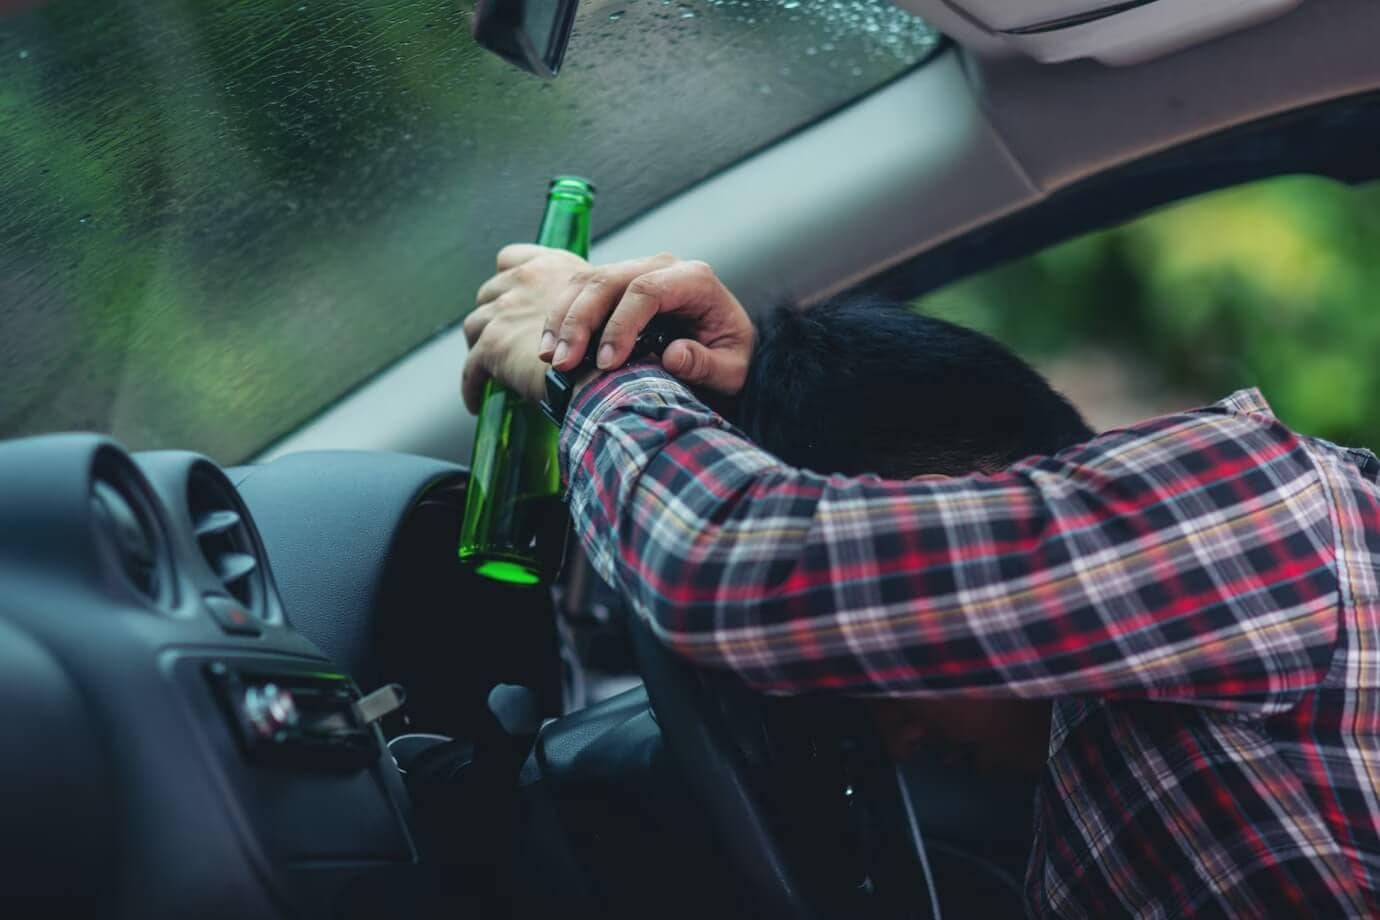 Visual portrayal of a man visibly impaired inside his car, spotlighting R&G Personal Injury Lawyers and their specialization in legal matters related to drunk driving. The image is contextually aligned with the page, emphasizing the firm's expertise as Drunk Driver Lawyers.